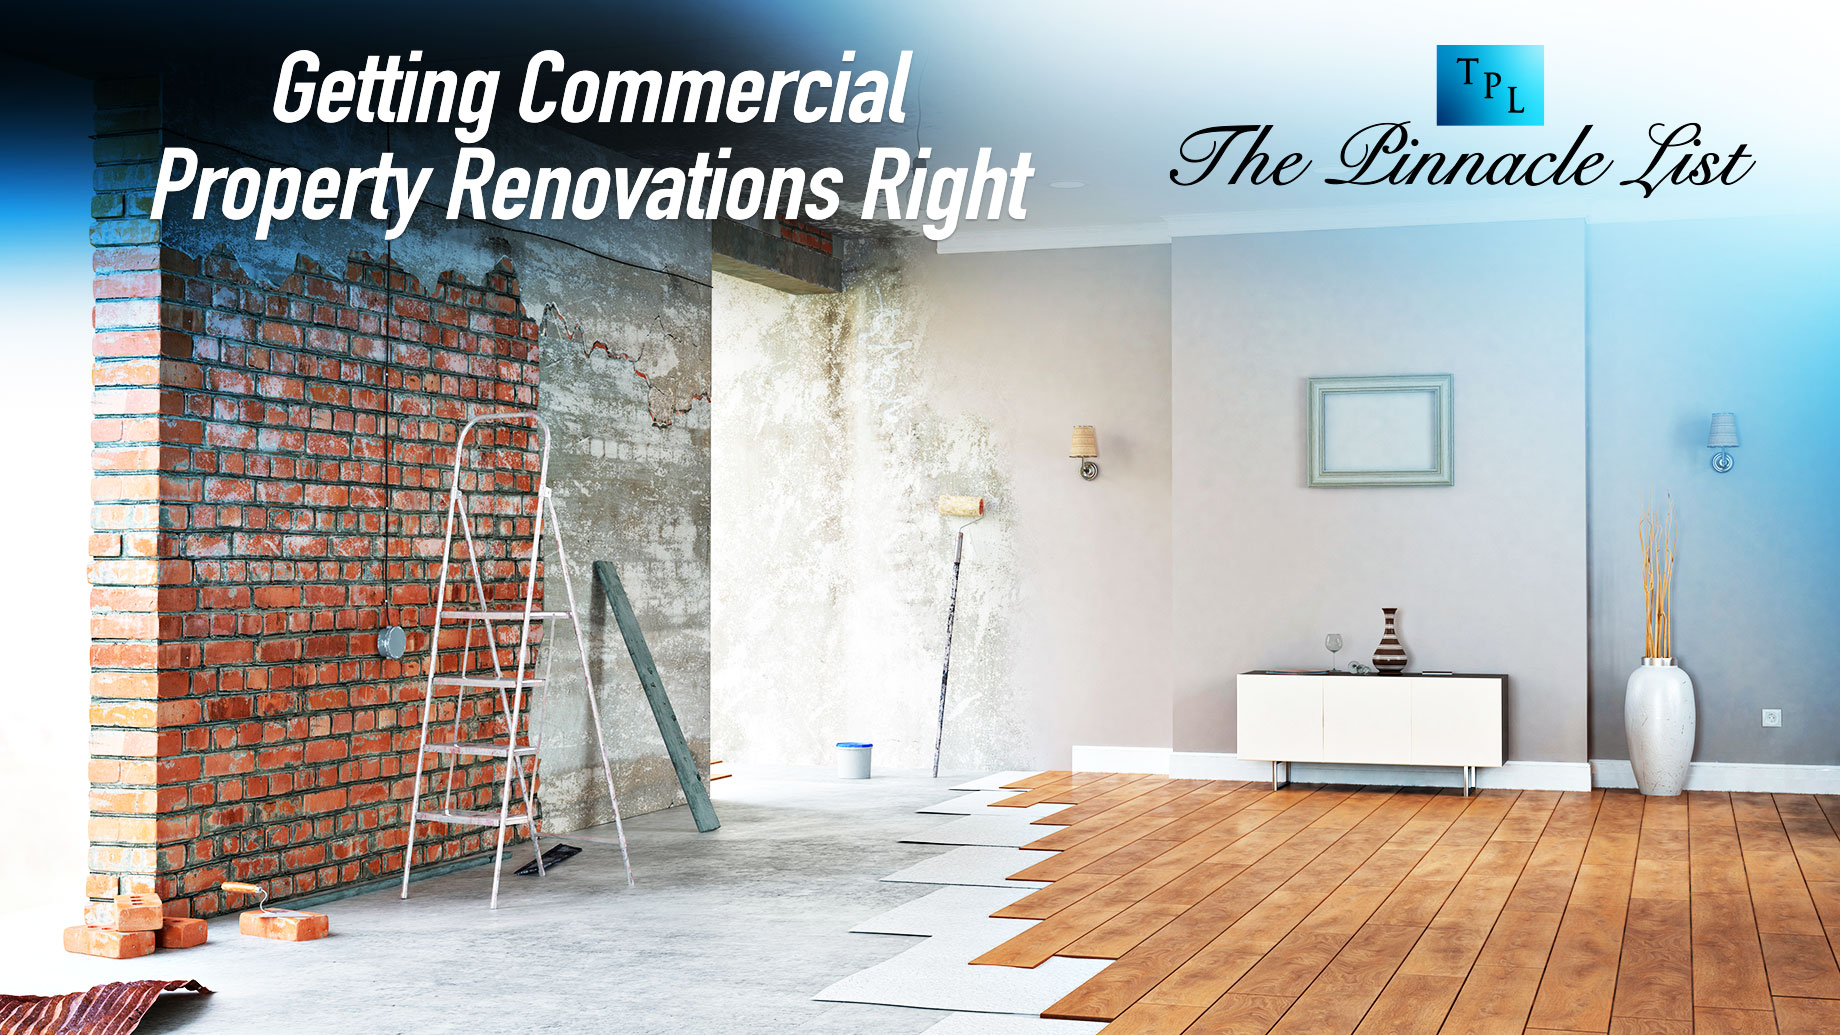 Getting Commercial Property Renovations Right